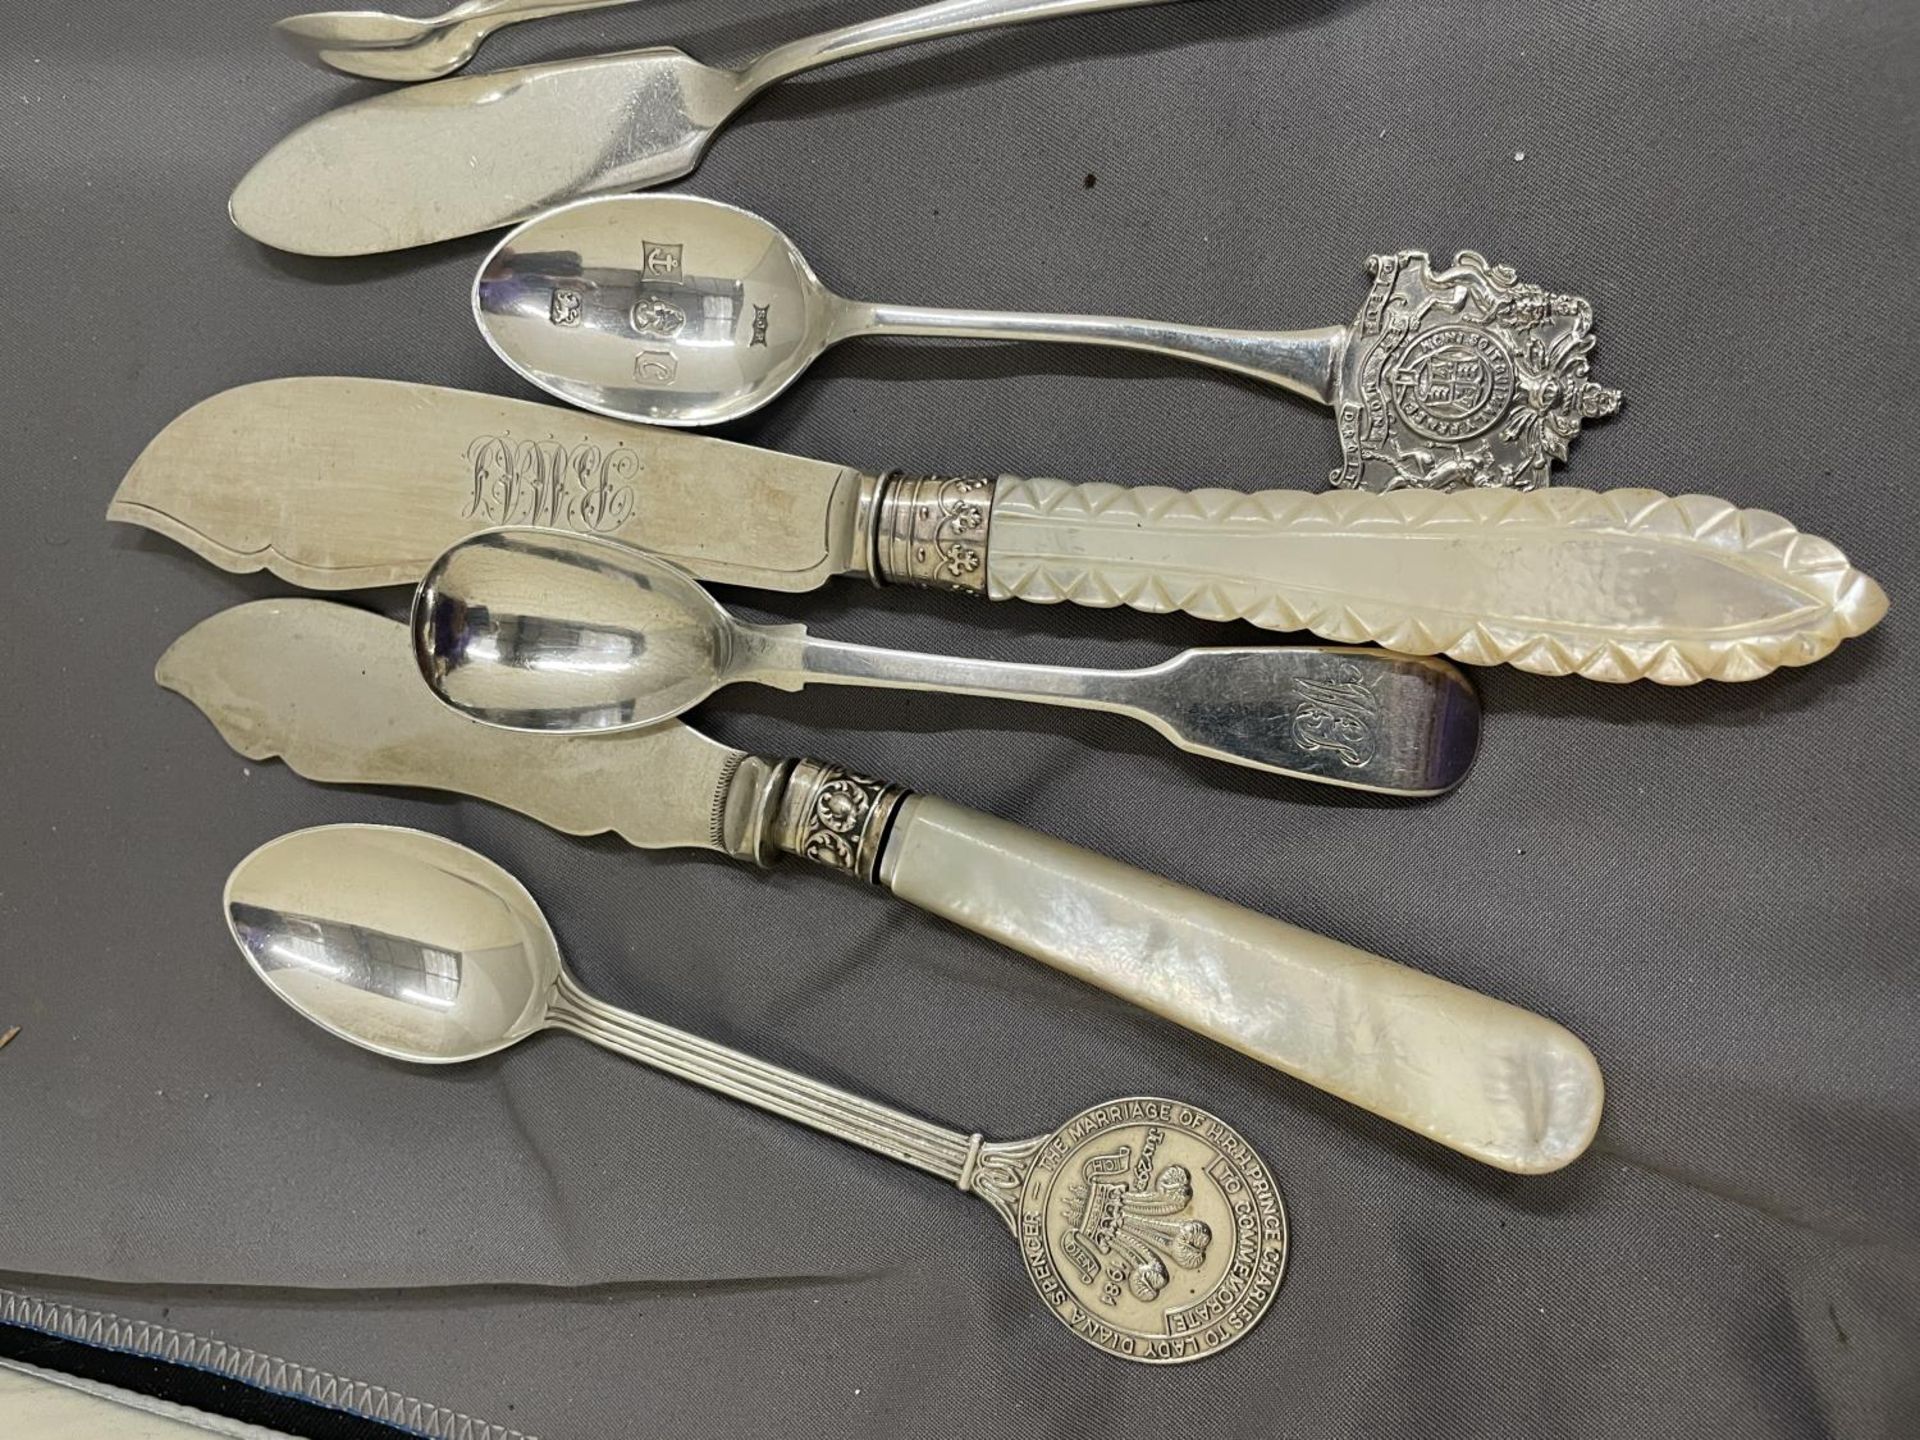 TEN PIECES OF VARIOUS MARKED SILVER ITEMS TO INCLUDE NIPS, FORKS, SPOONS AND KNIVES - Image 6 of 8